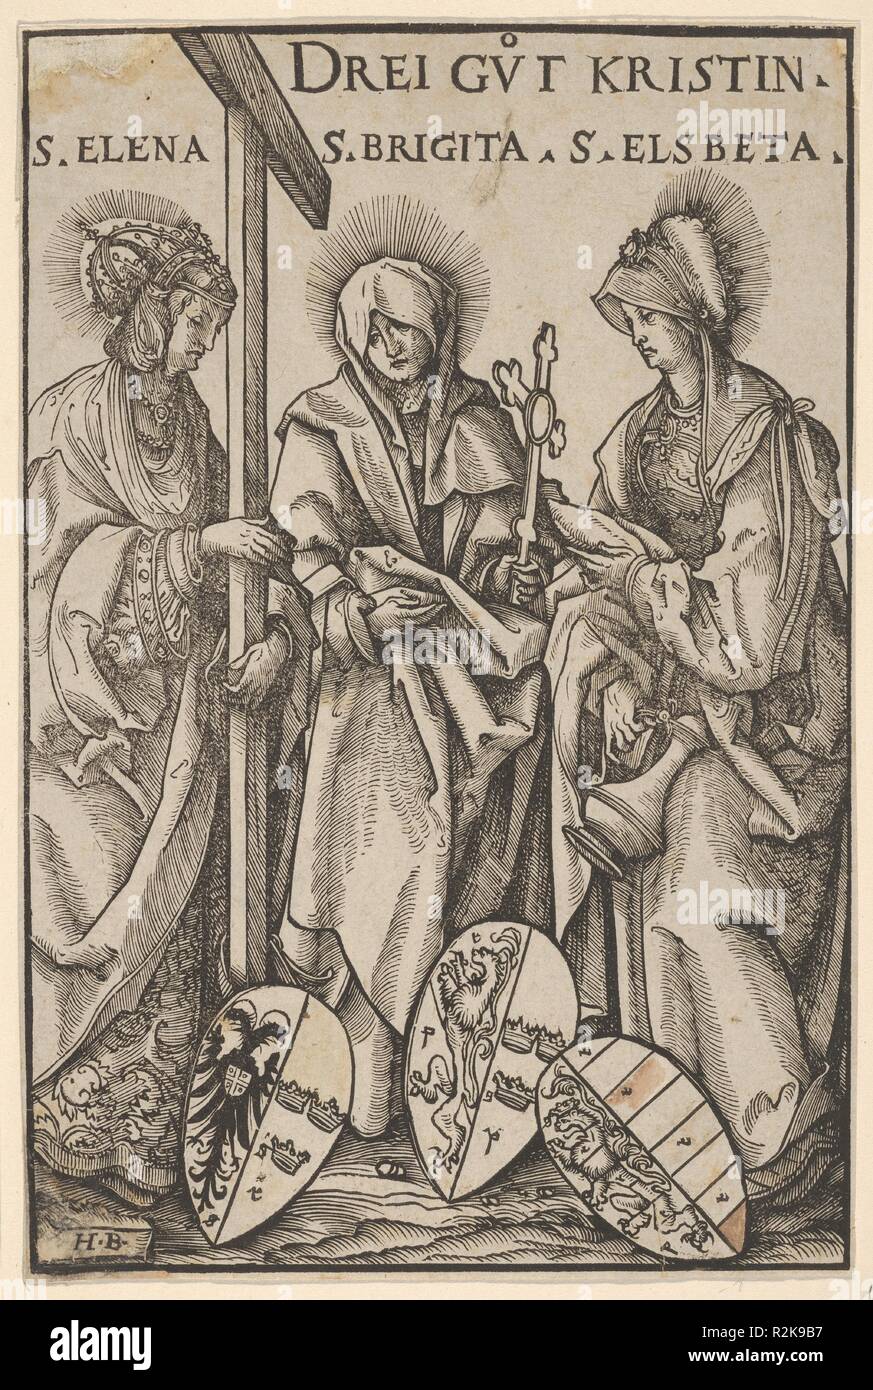 The Three Christian Heroines (Drei Gut Kristin), from Heroes and Heroines. Artist: Hans Burgkmair (German, Augsburg 1473-1531 Augsburg); Block cut by Jost de Negker (1480-1546). Dimensions: Sheet: 8 1/8 × 5 3/16 in. (20.7 × 13.2 cm). Series/Portfolio: Heroes and Heroines. Date: 1516.  At left, Saint Helena wearing the imperial crown and holding up a cross; at center, Saint Brigit holding a processional cross; at right, Saint Elisabeth with a stein. Below, three coats of arms. From a series of six woodcuts with Heroes and Heroines, each with three figures. Museum: Metropolitan Museum of Art, Ne Stock Photo